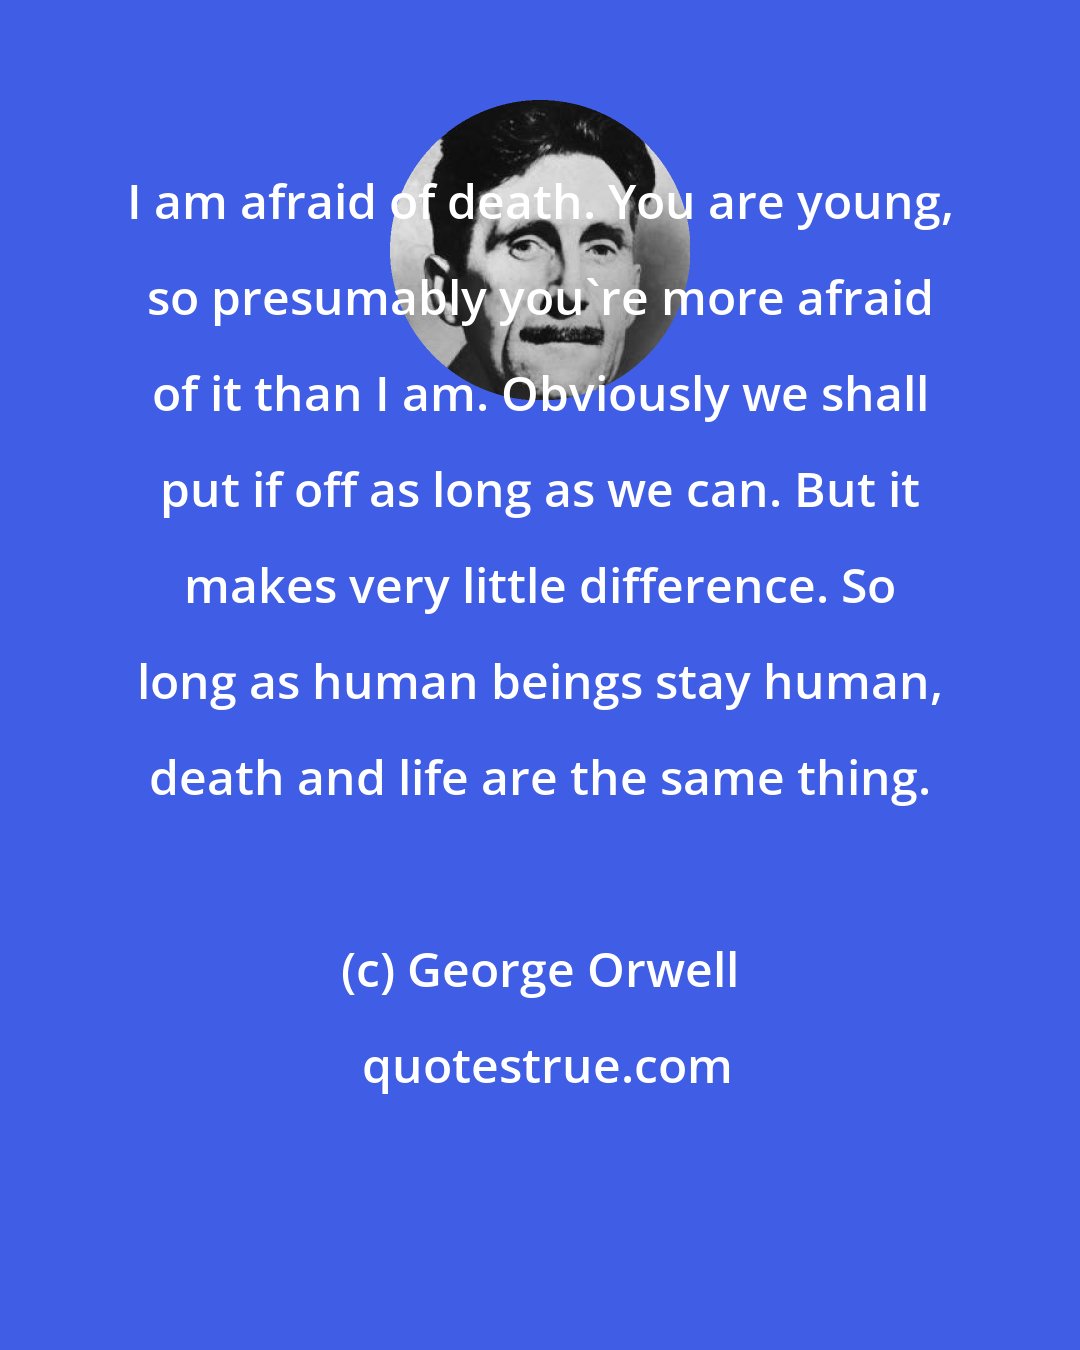 George Orwell: I am afraid of death. You are young, so presumably you're more afraid of it than I am. Obviously we shall put if off as long as we can. But it makes very little difference. So long as human beings stay human, death and life are the same thing.